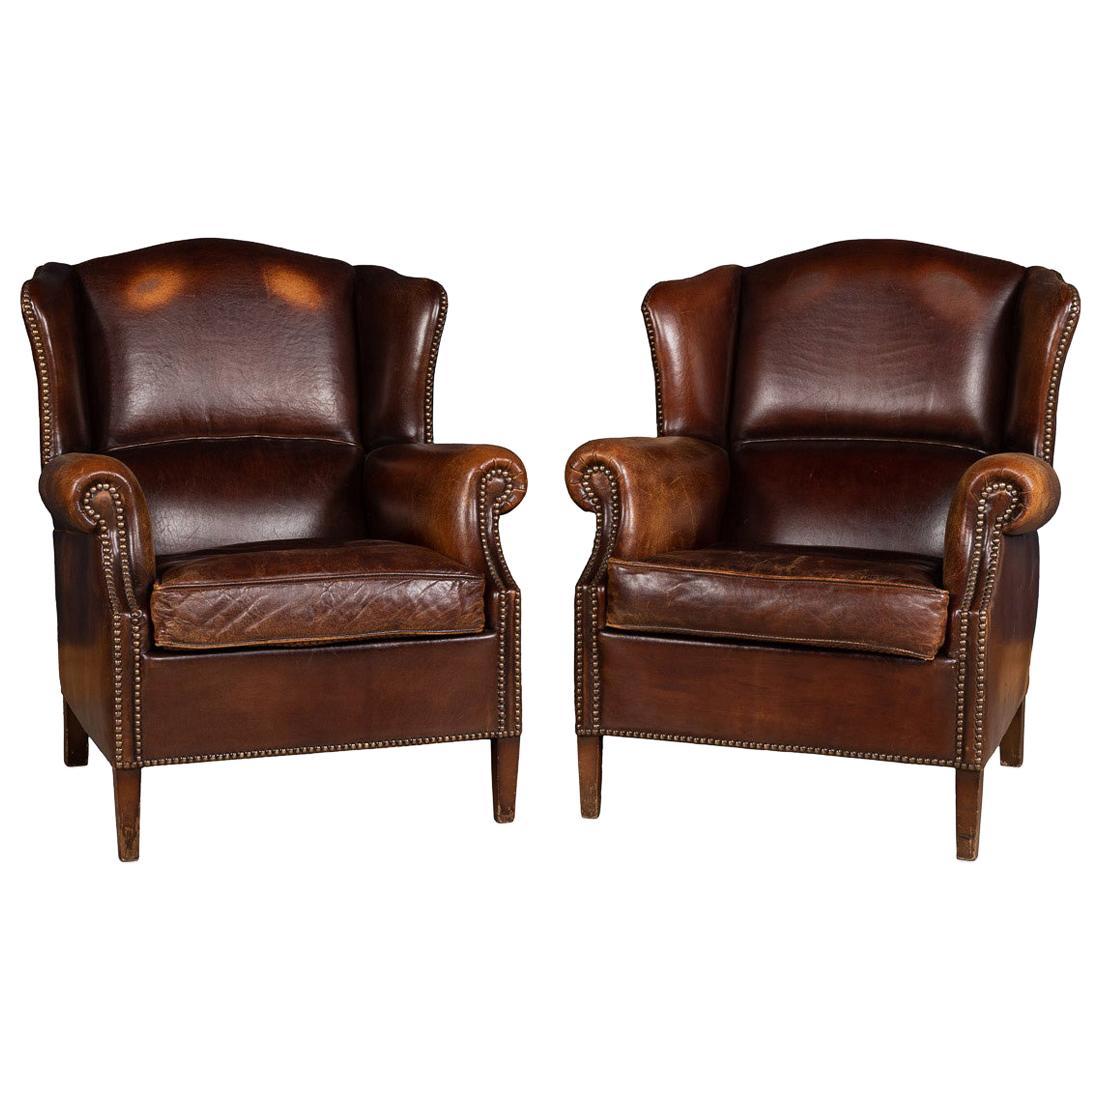 20th Century Pair of Dutch Leather Wing Back Armchairs, circa 1970